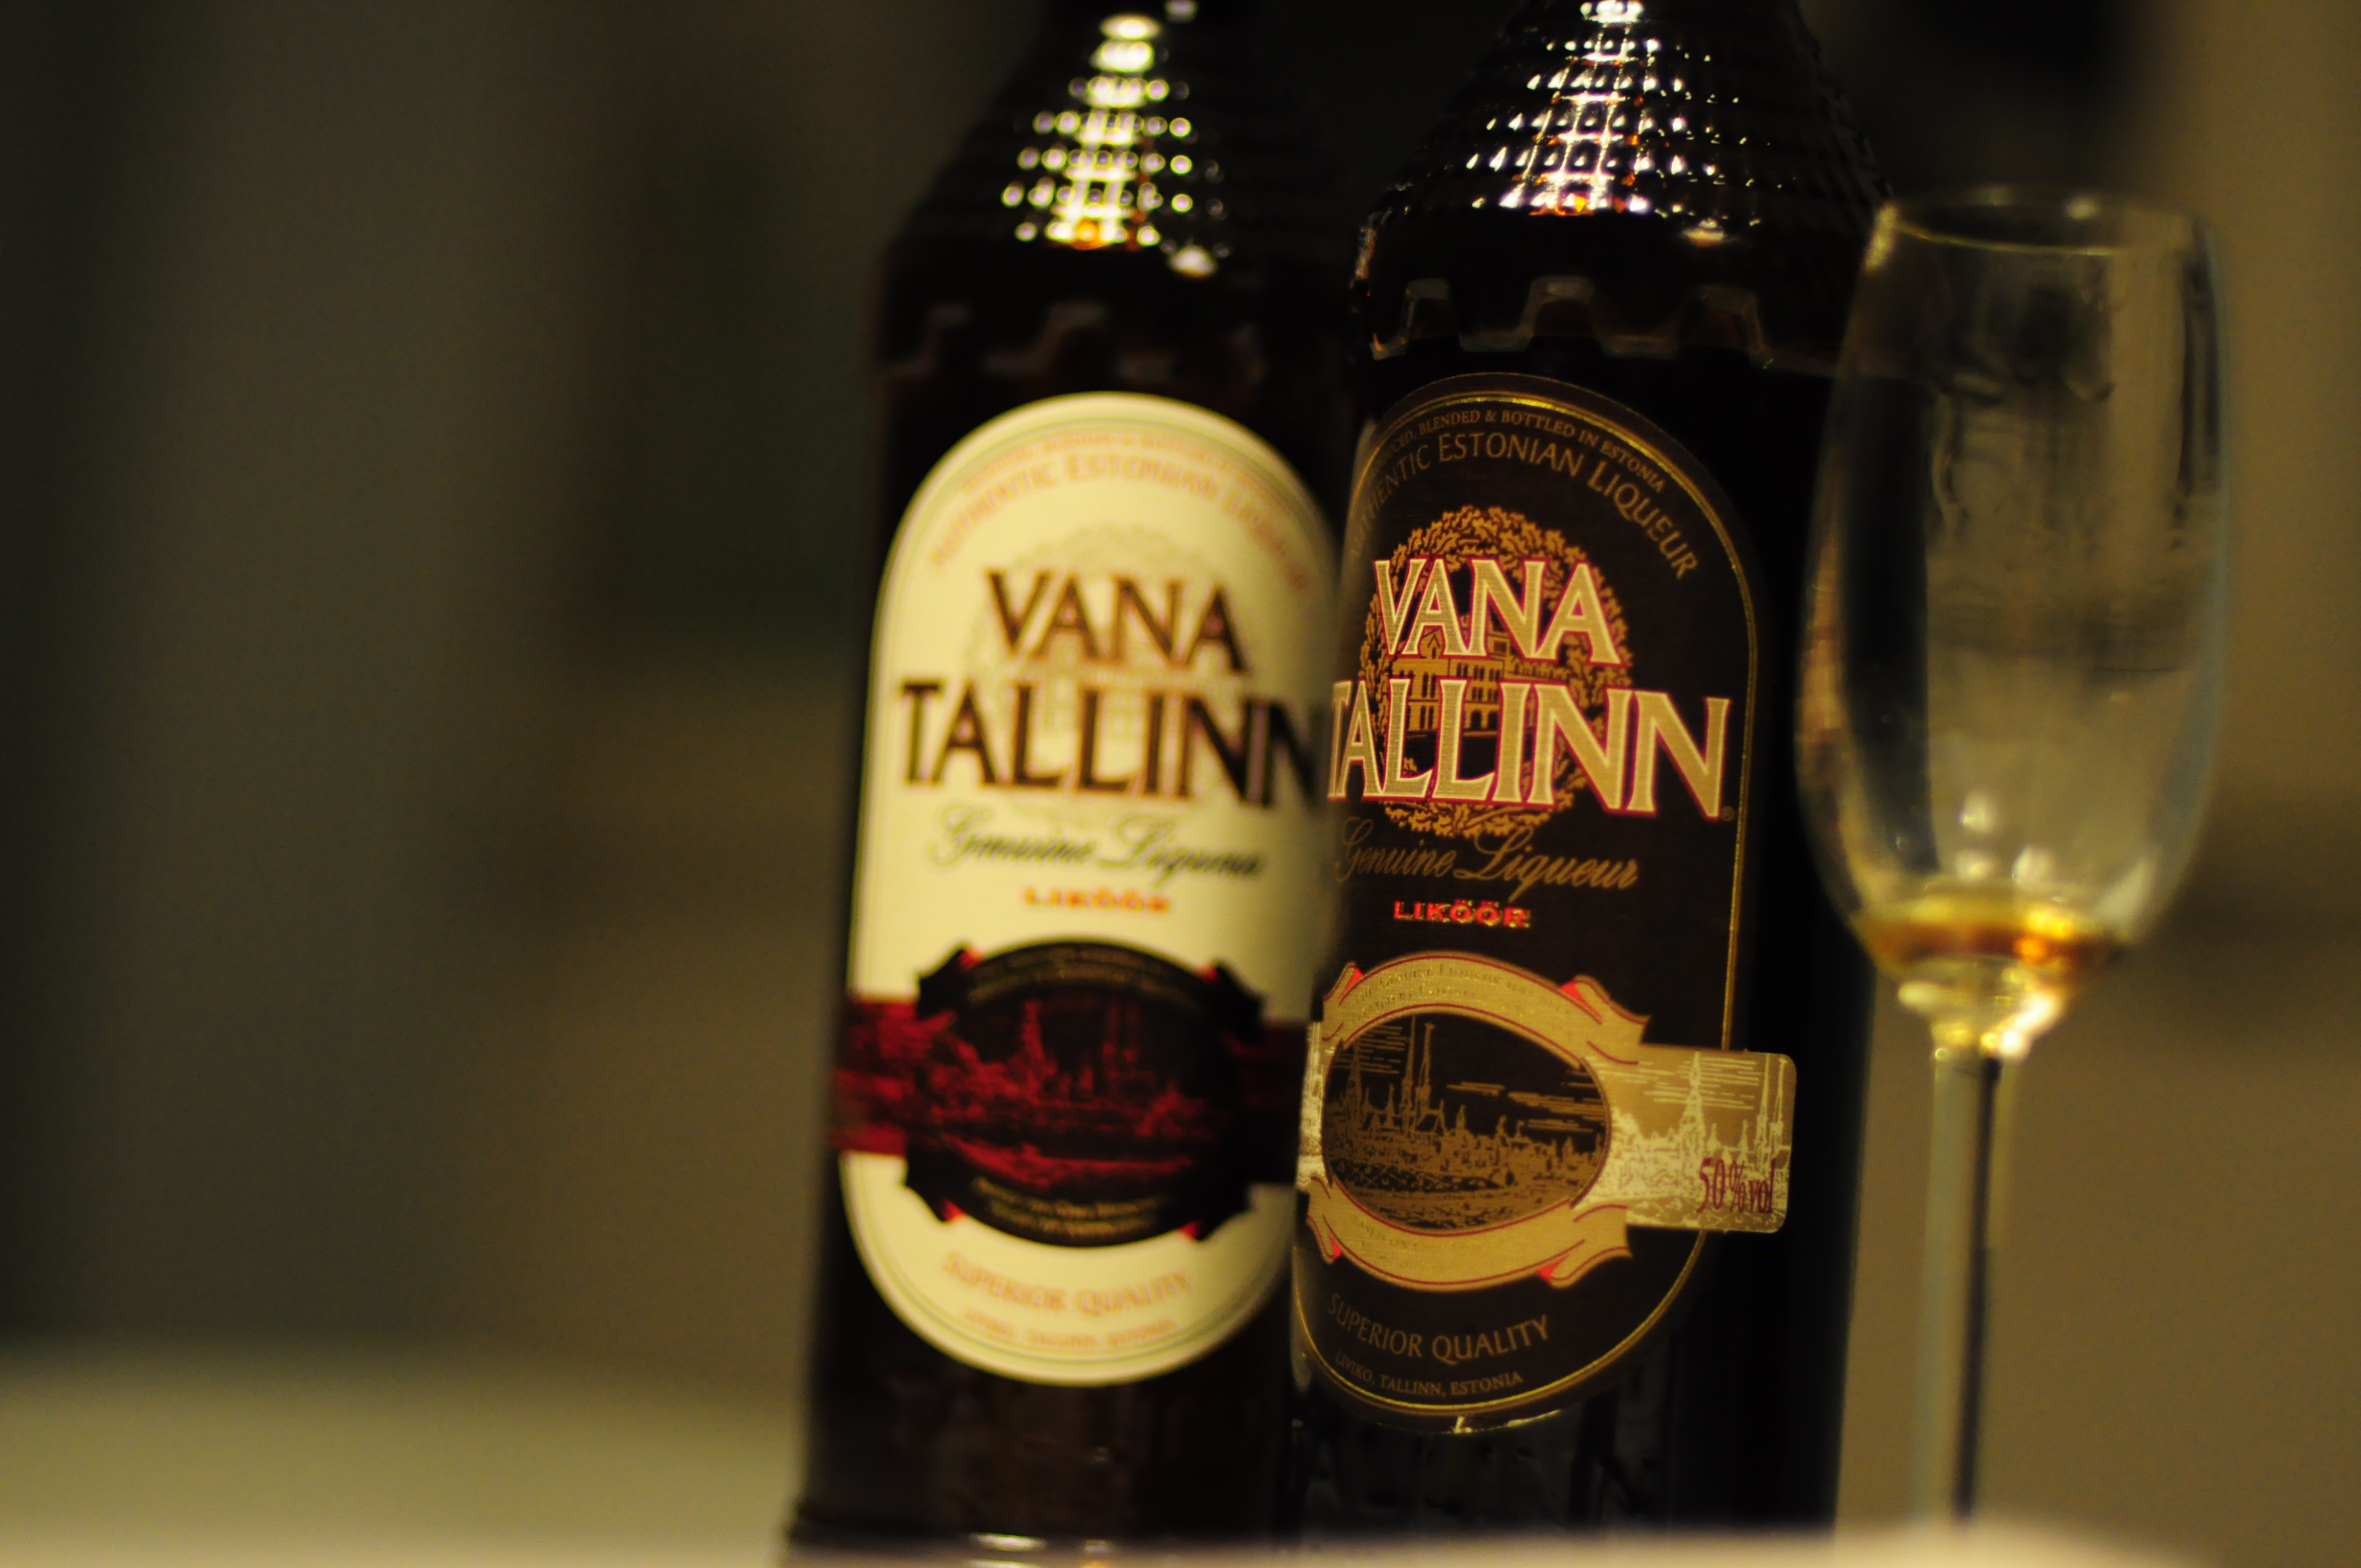 One liqueur that is common in Estonia is Vana Tallinn, which tastes good in coffee and can be baked into desserts.